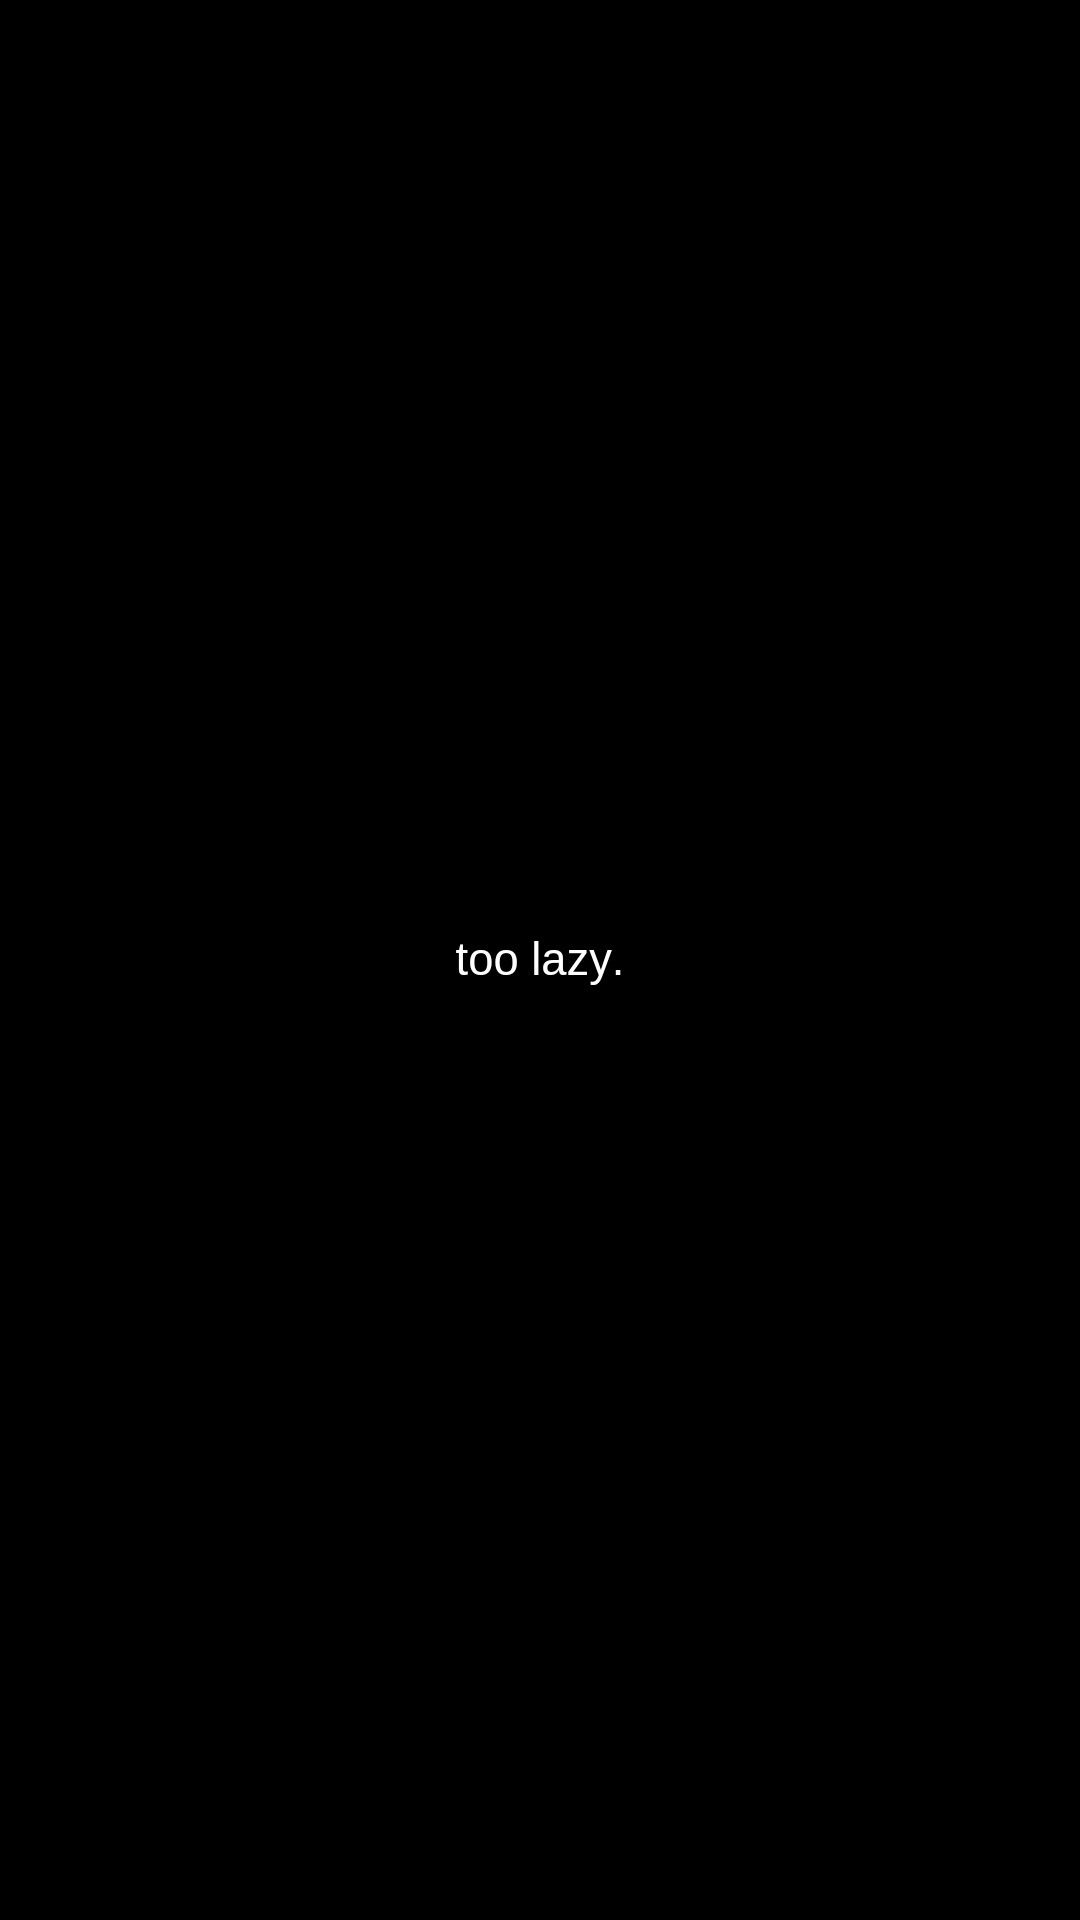 too lazy. Cute wallpaper quotes, Aesthetic words, Pretty quotes